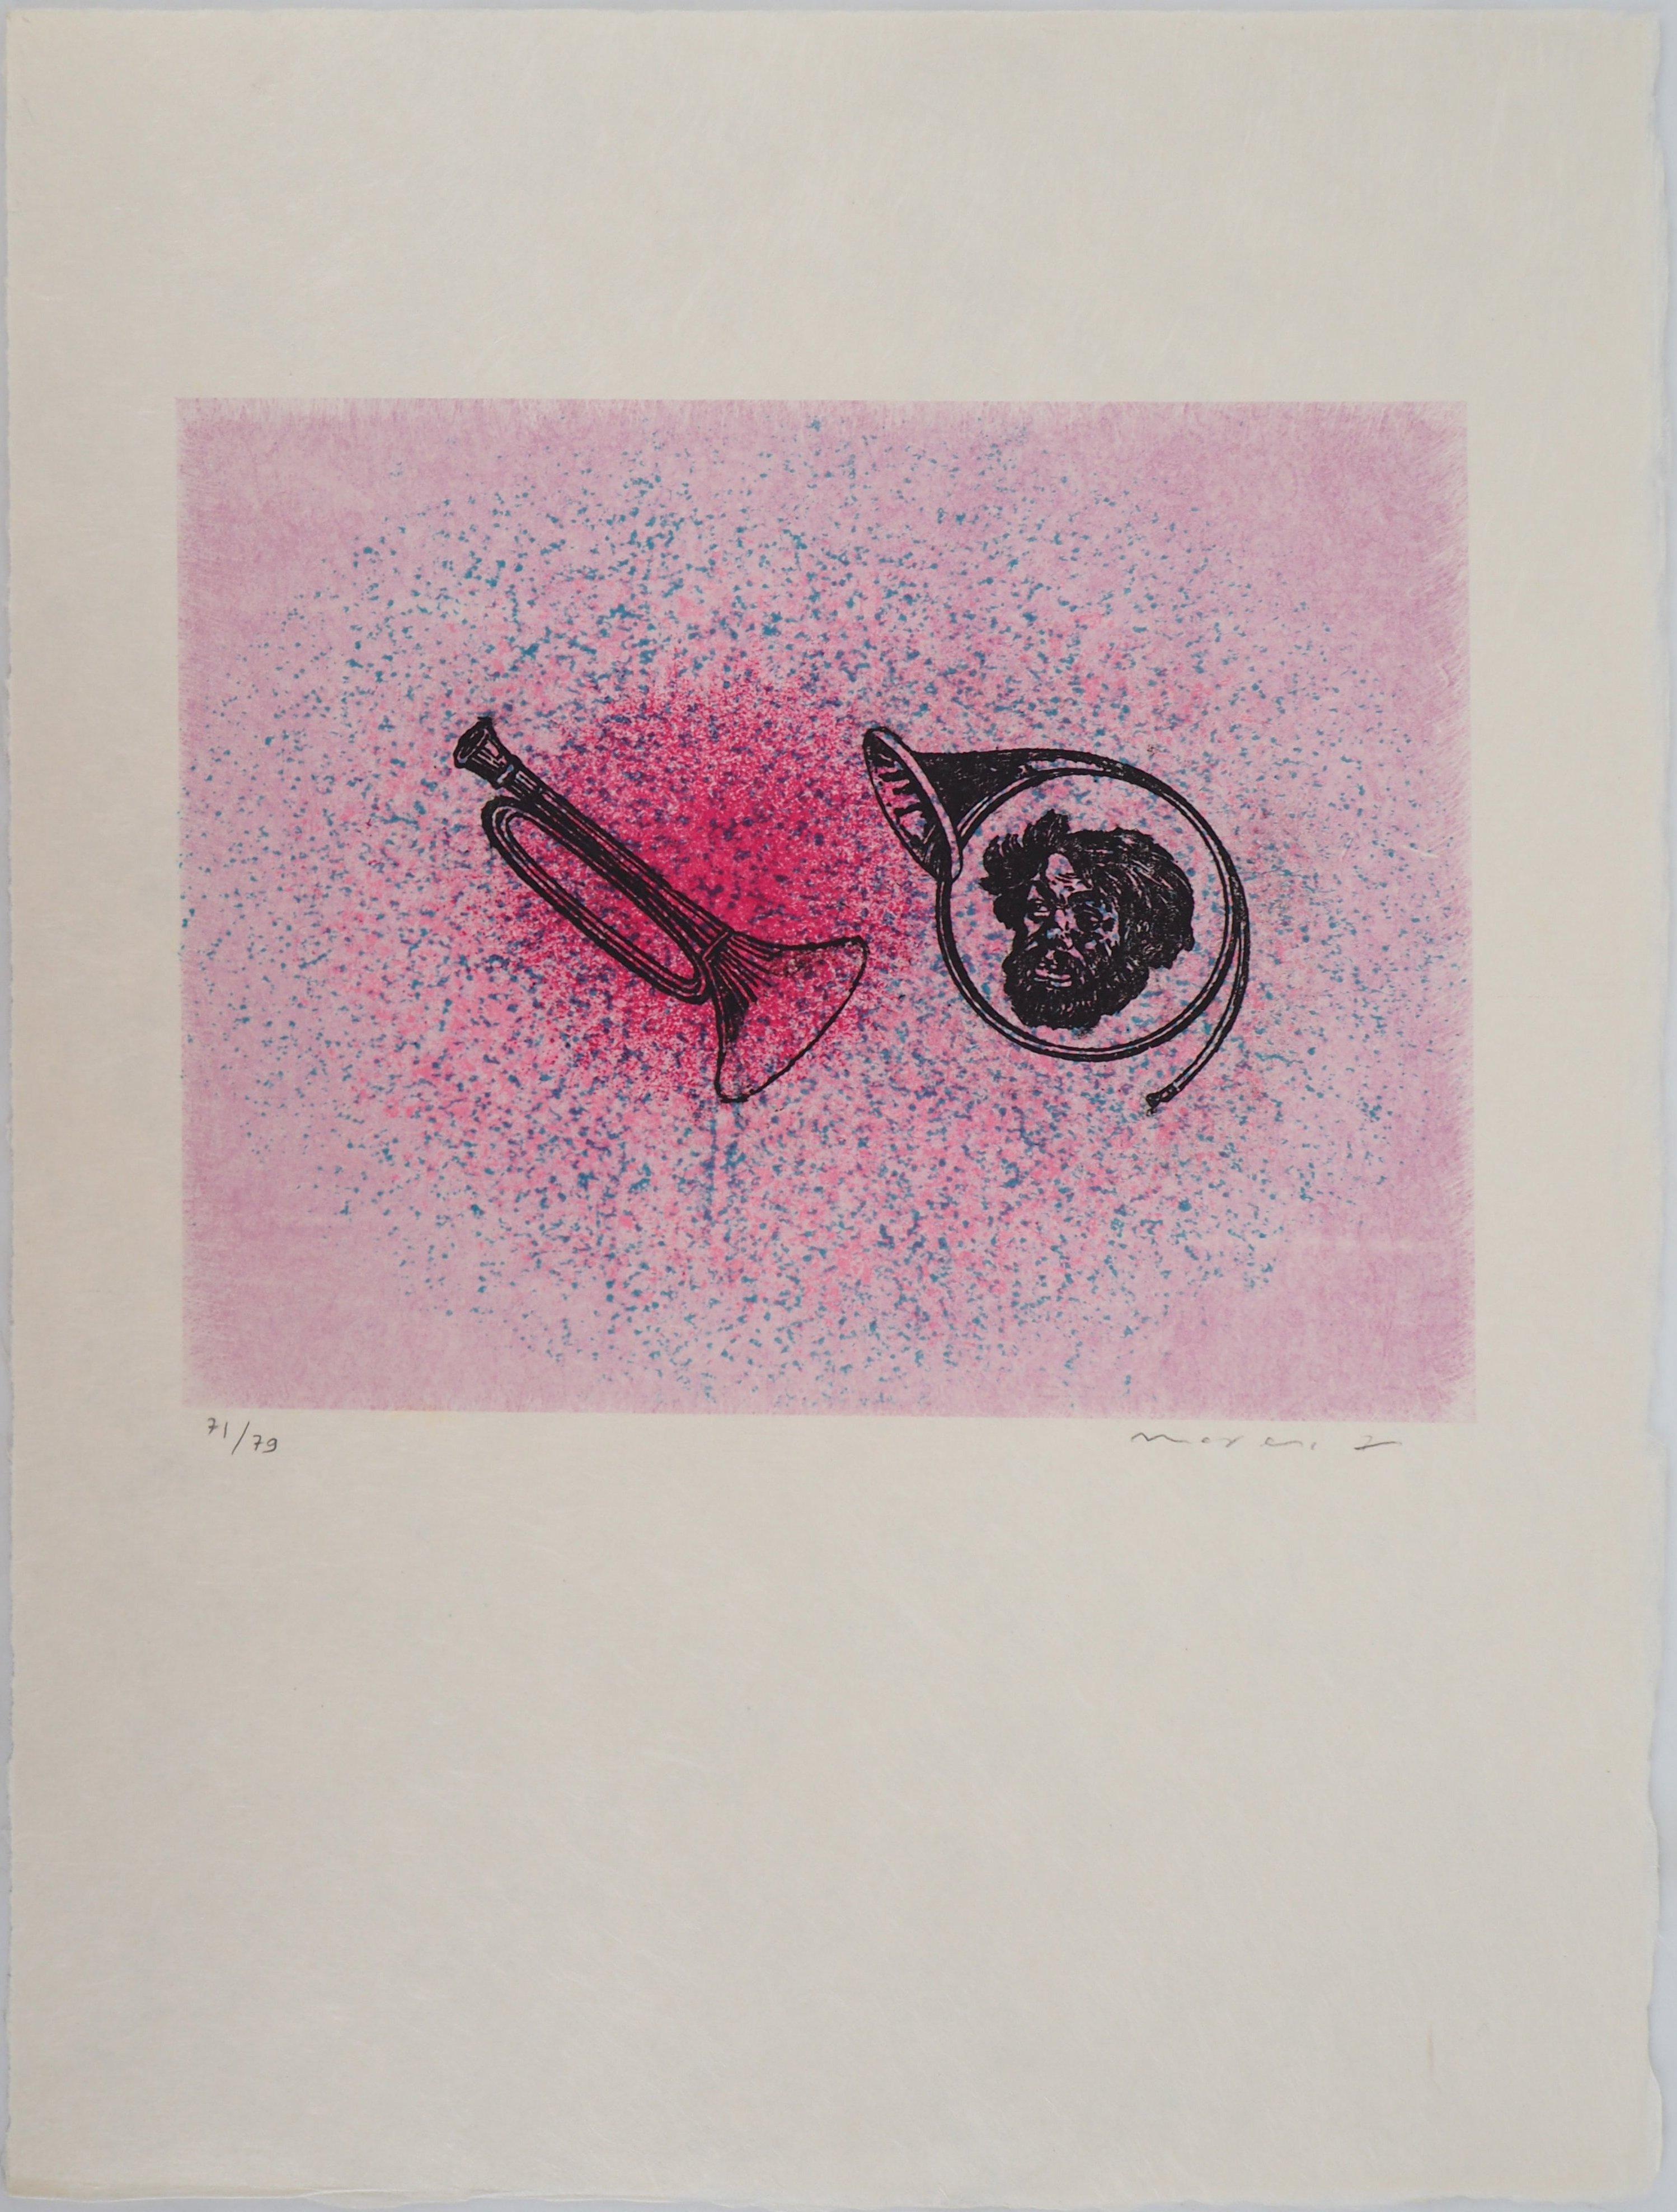 Pink Melody - Original Lithograph Handsigned & limited 79 copies - Mourlot 1972 - Print by Max Ernst